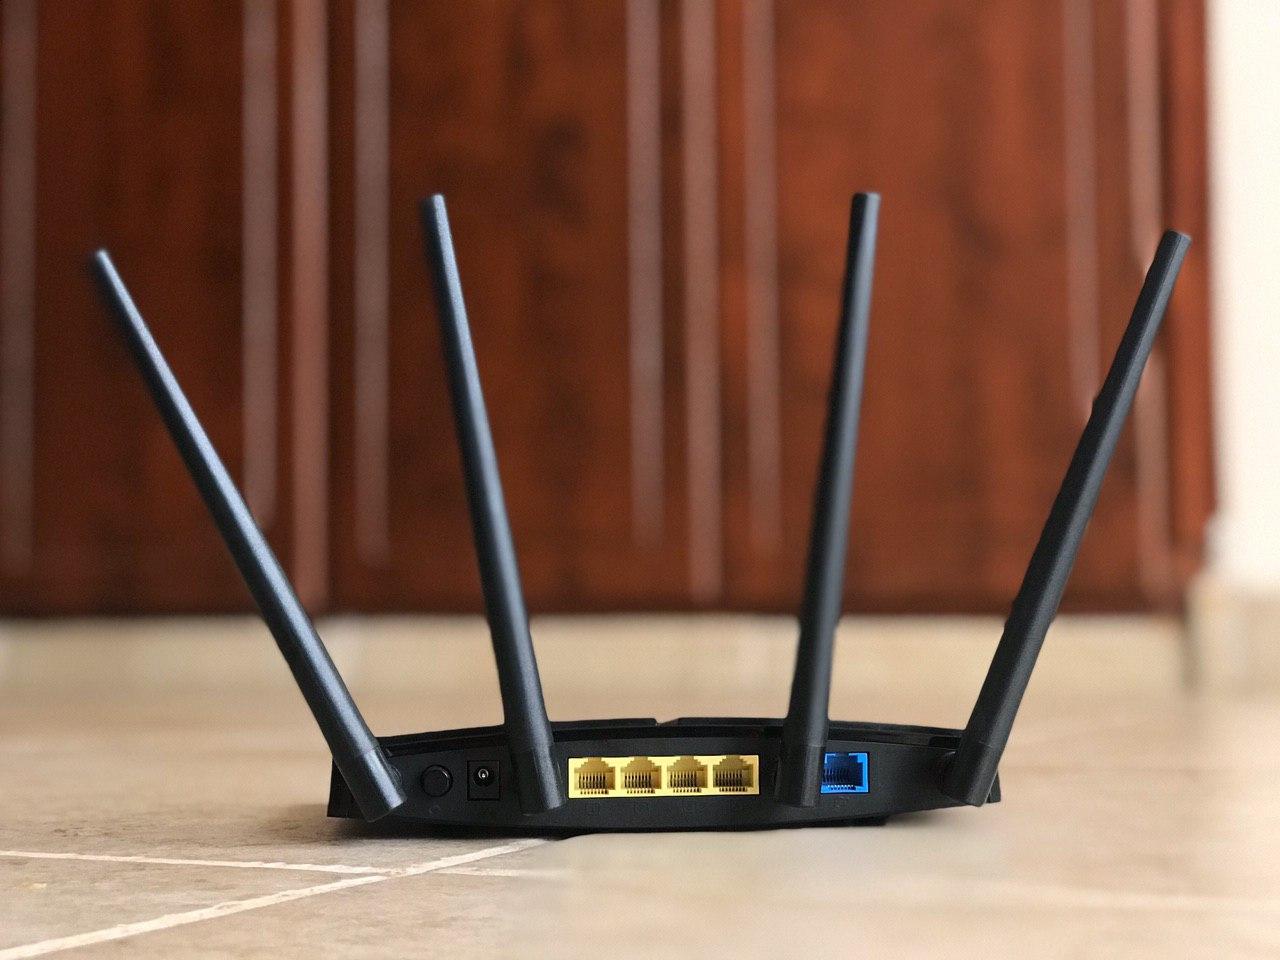 Top Unlocked 4G LTE WiFi Routers You should buy in 2021 - Dignited